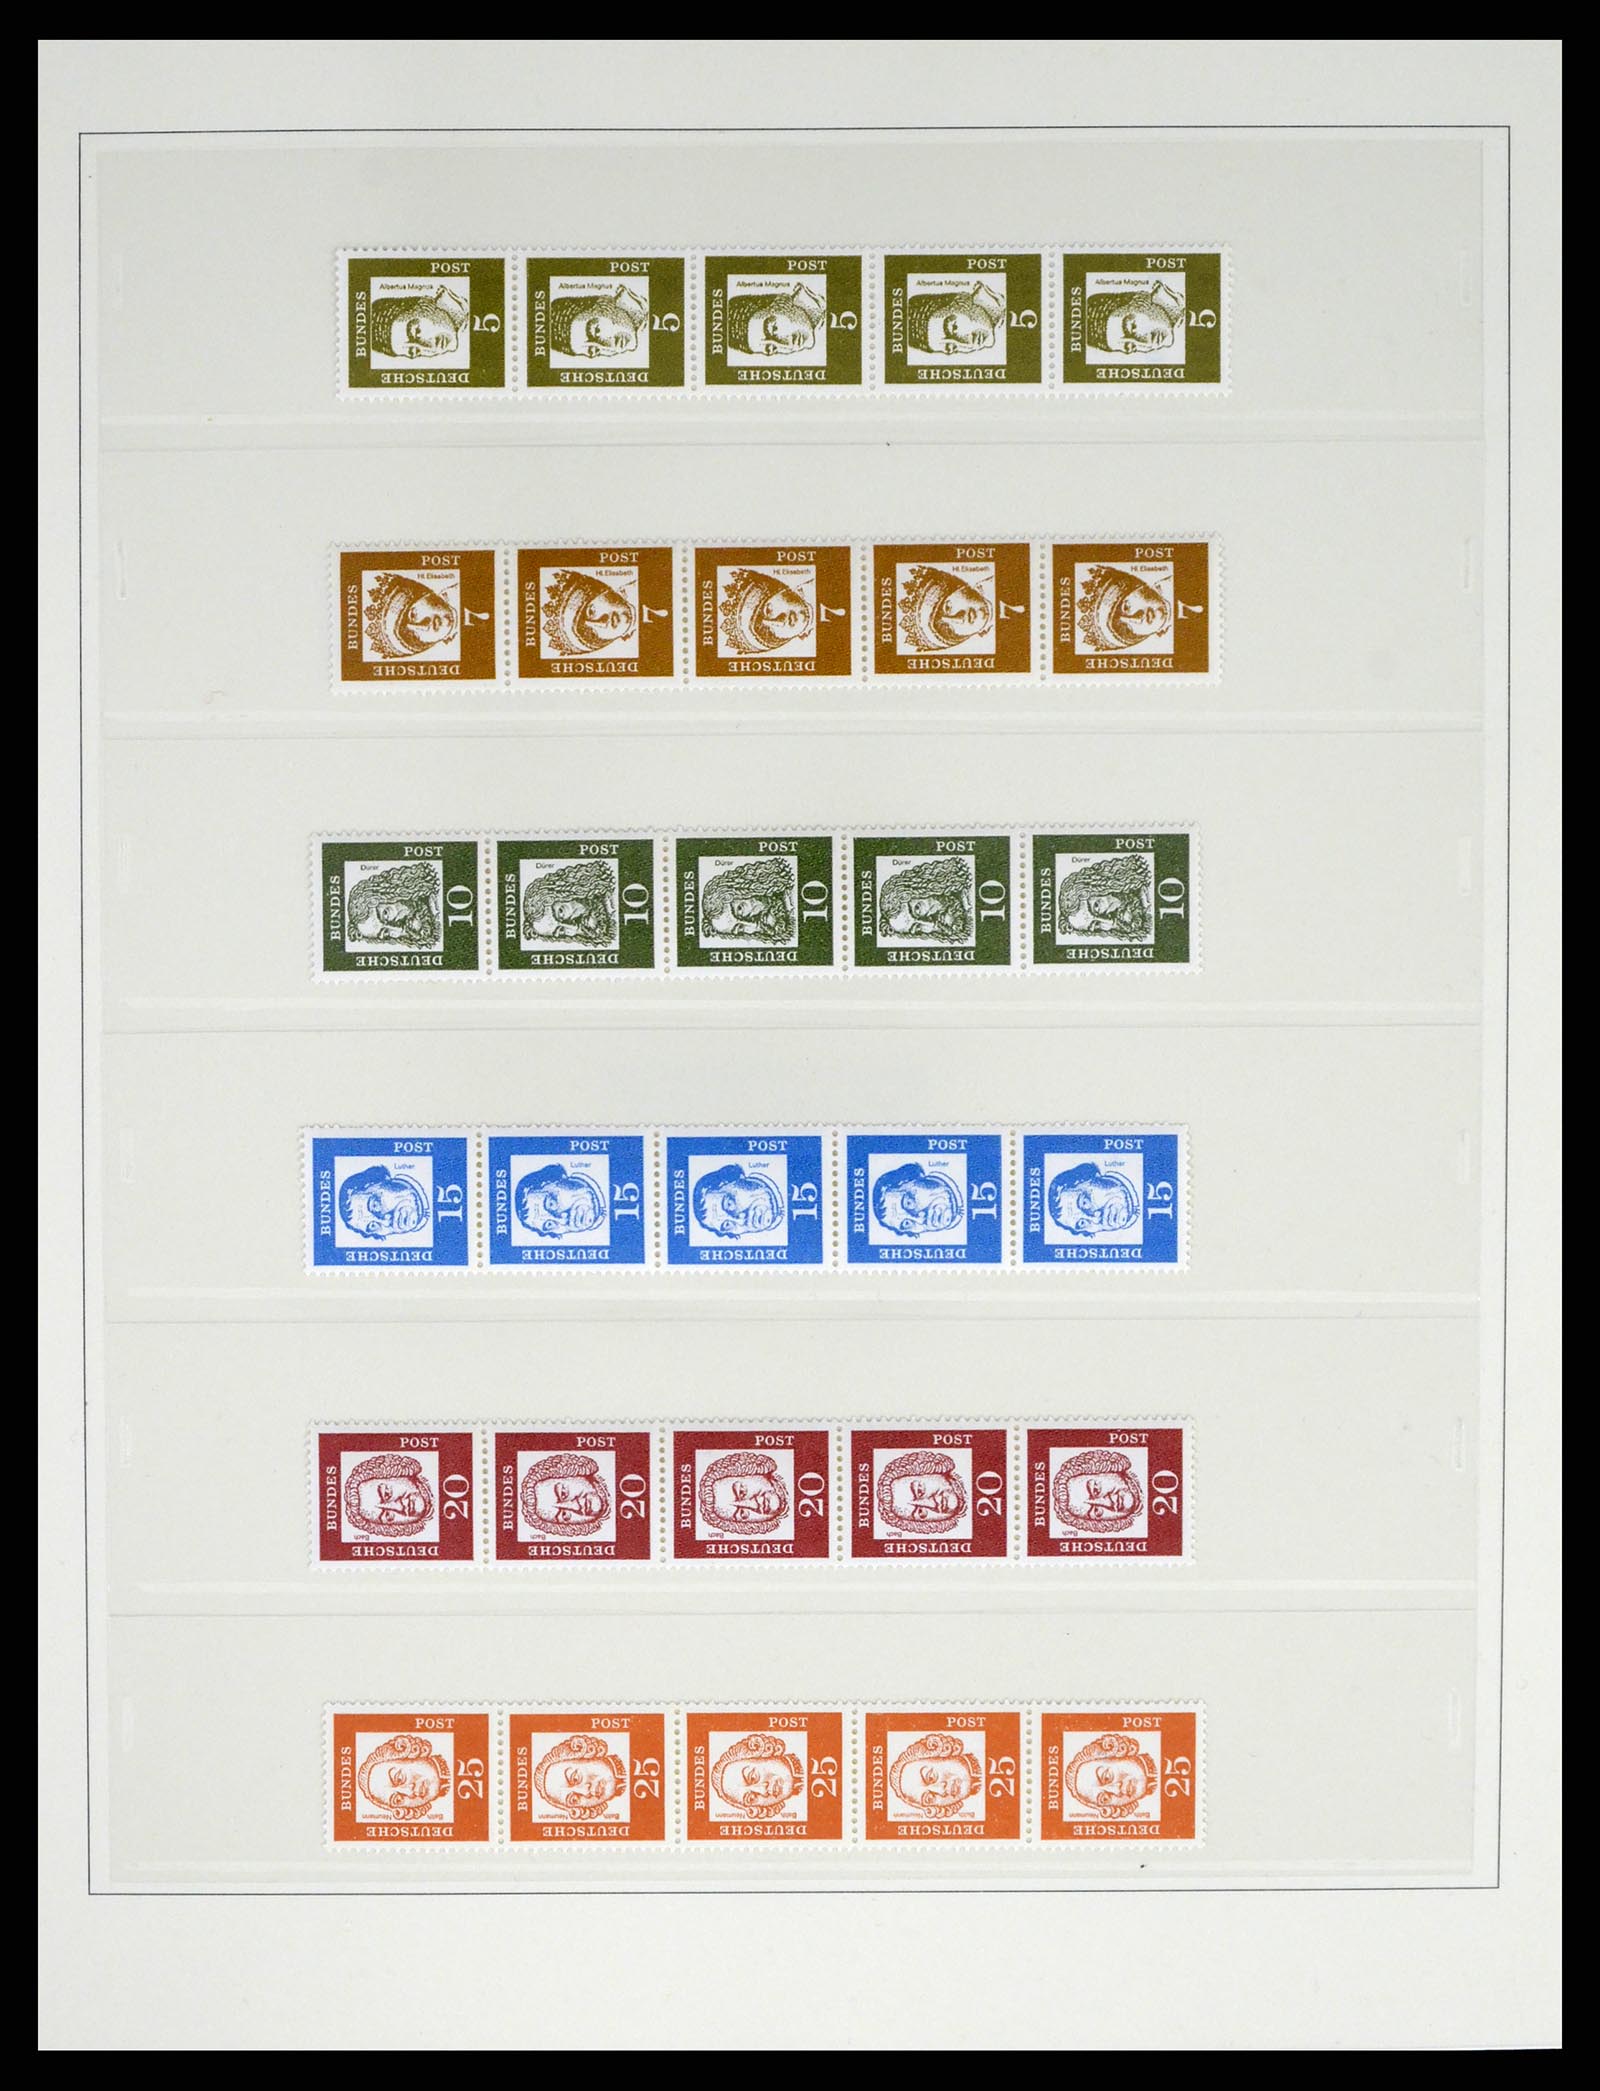 37354 001 - Stamp collection 37354 Bundespost and Berlin 1955-2000.